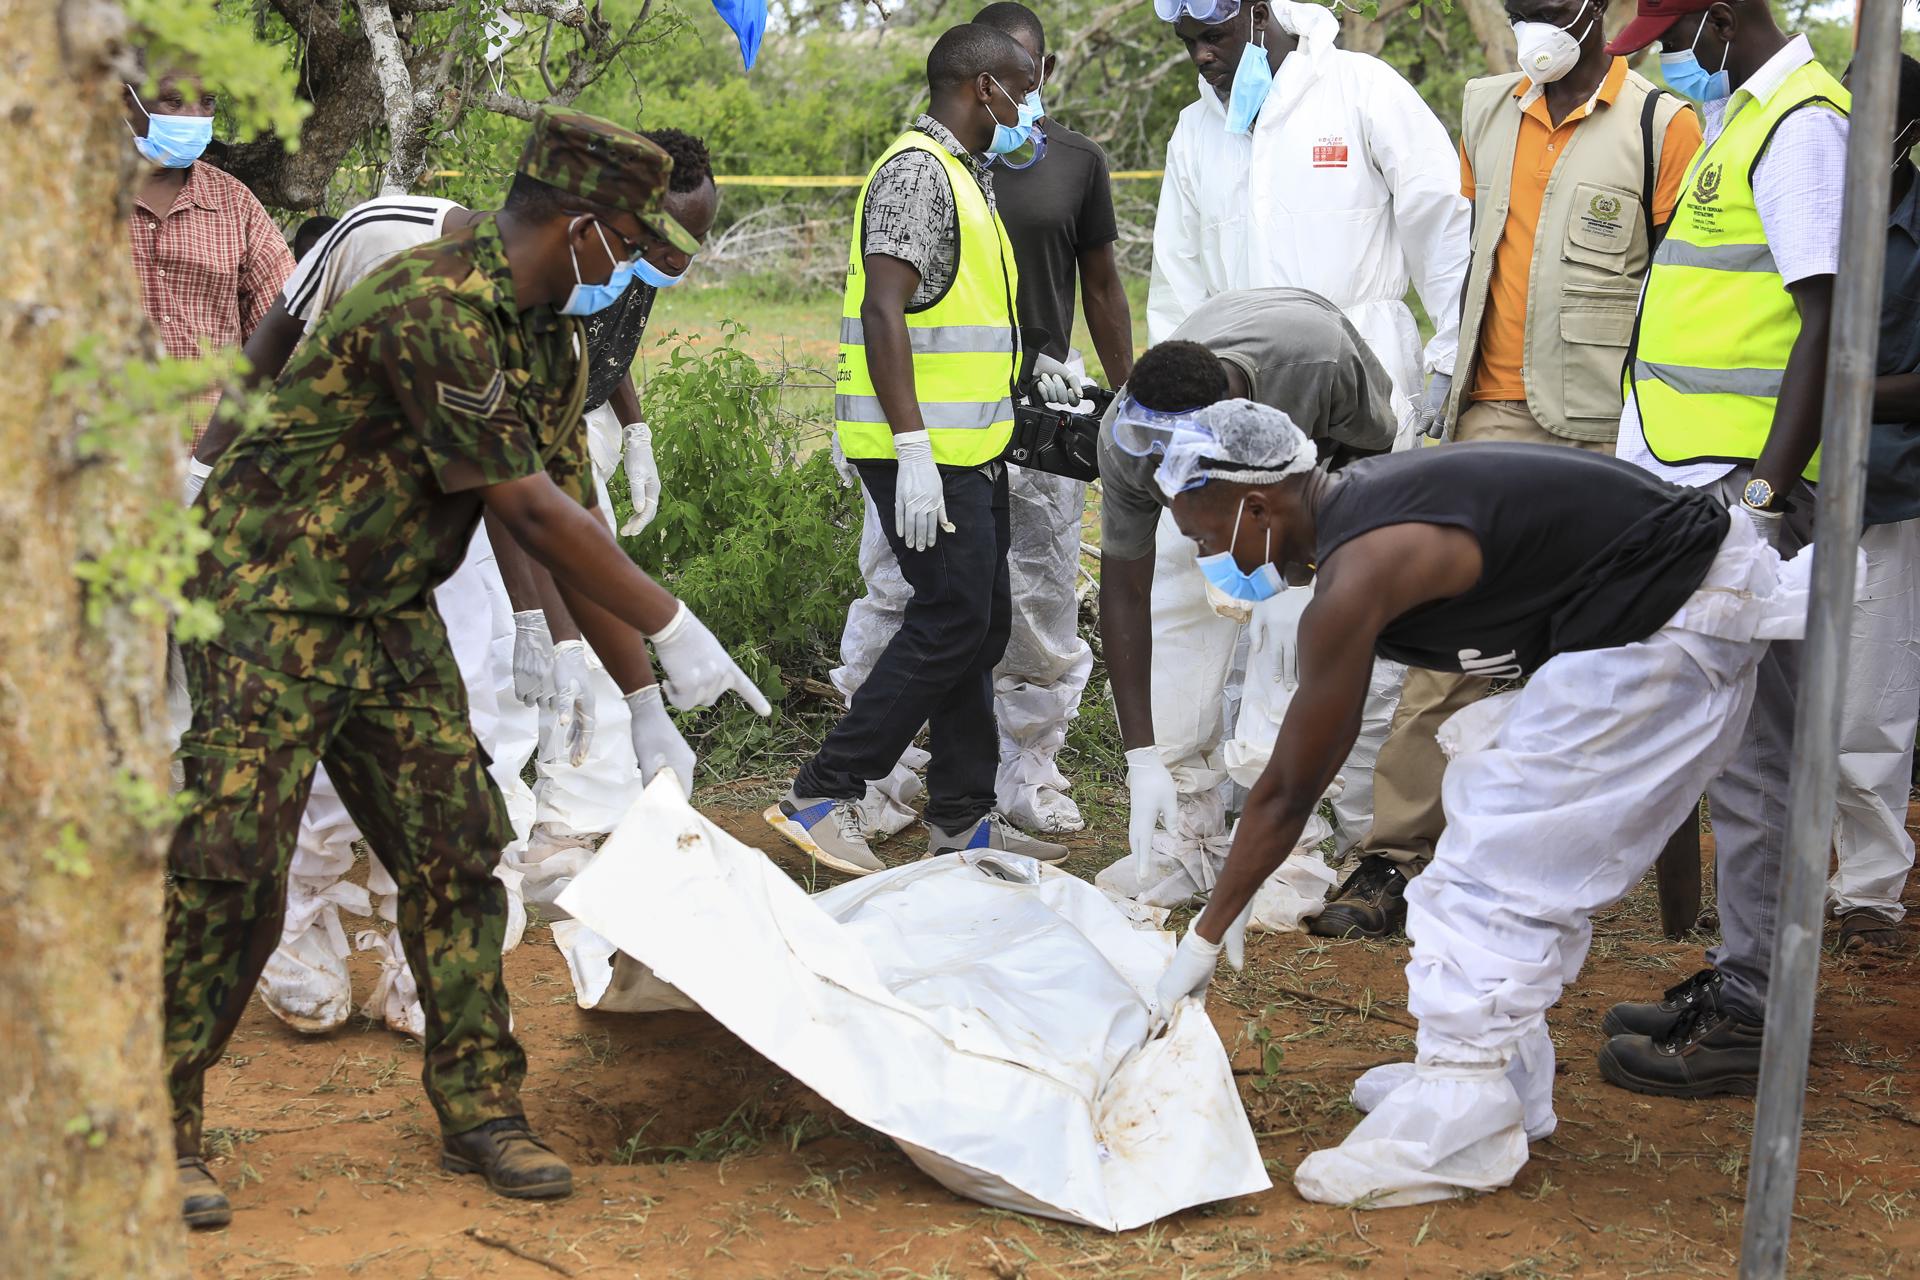 Kenyan homicide detectives and forensic experts from the Directorate of Criminal Investigations (DCI), examine exhumed bodies from several shallow mass graves of suspected members of a Christian cult after starving themselves to death, after allegedly being told by their controversial preacher Paul Mackenzie that they would go to heaven if they starved themselves to death, in the coastal Shakahola forest, in Kilifi, Kenya, 23 April 2023. EFE/EPA/STR
